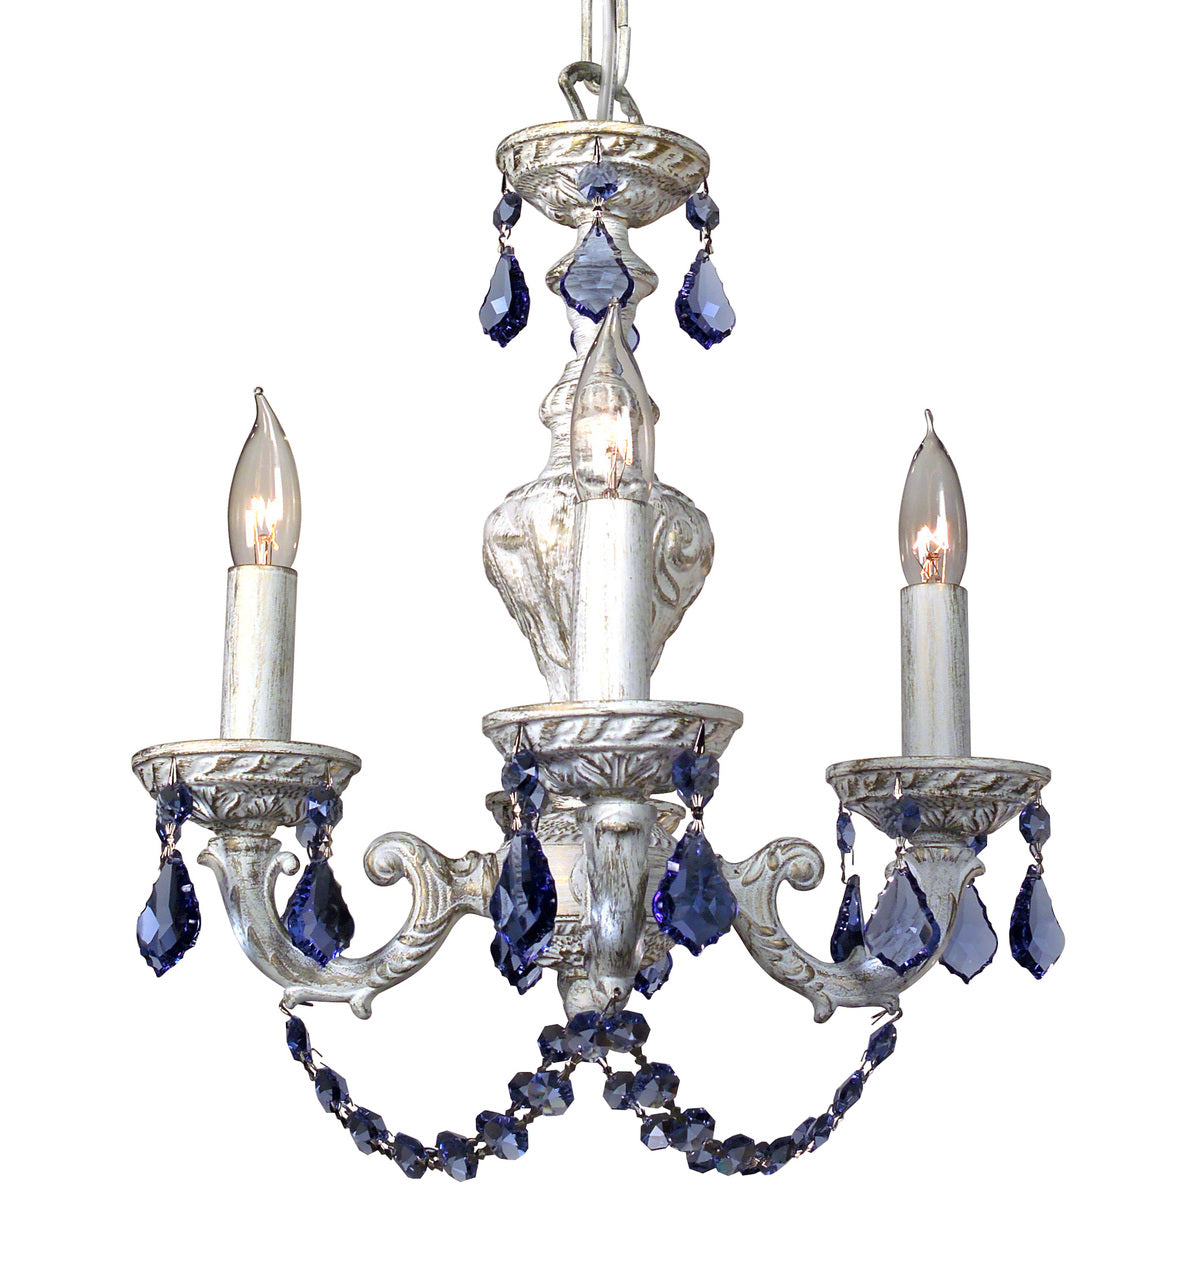 Classic Lighting 8335 AW SAP Gabrielle Crystal Mini Chandelier in Antique White